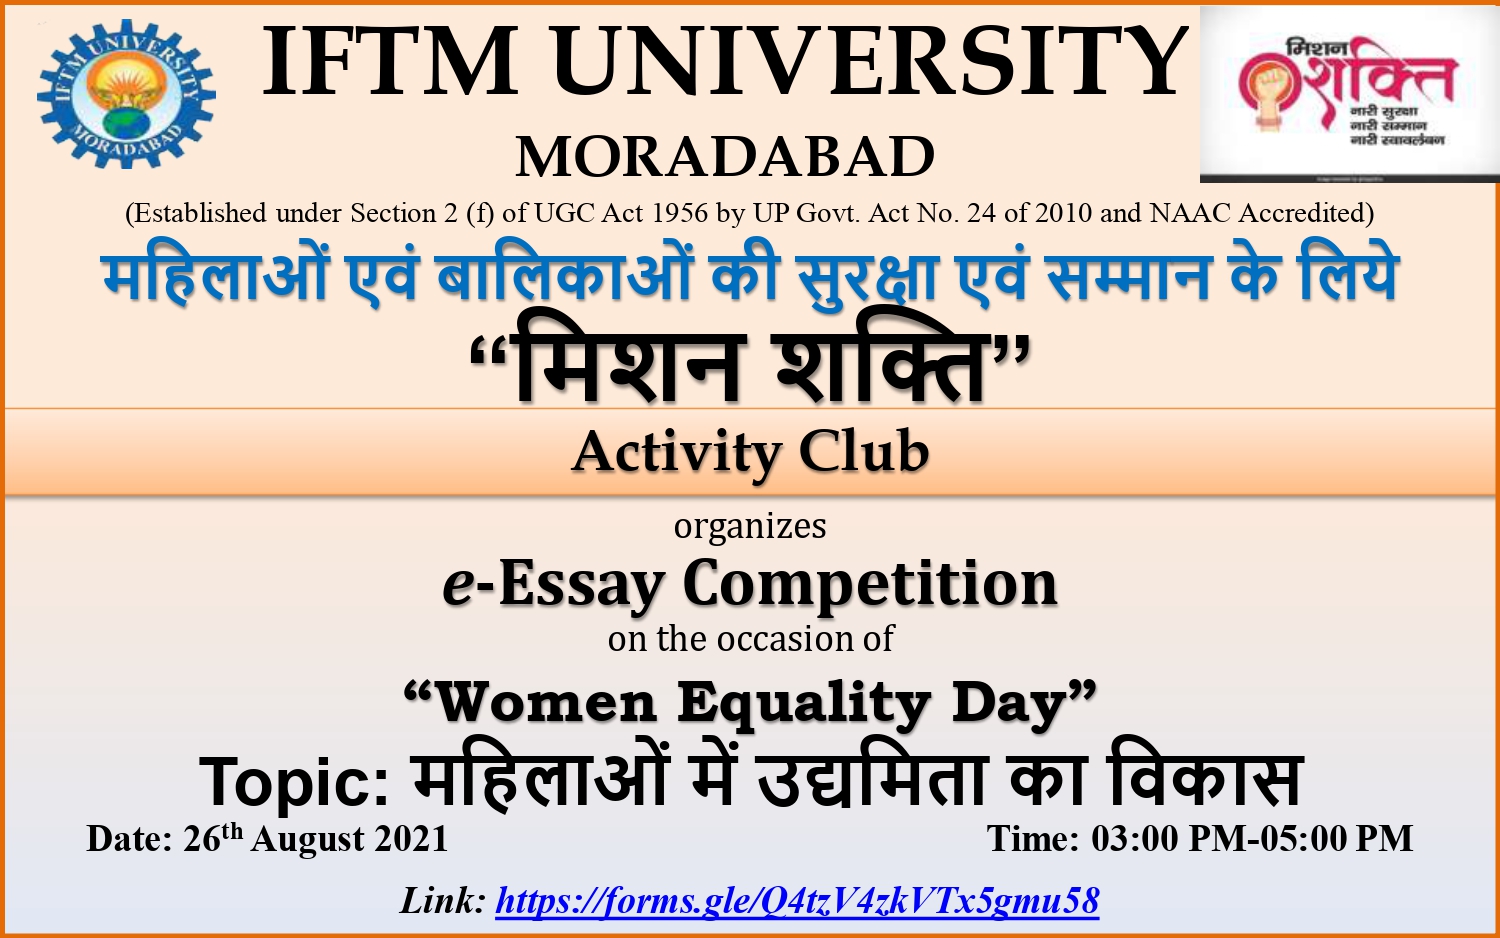 e-Essay Writing Competition on Women Equality Day